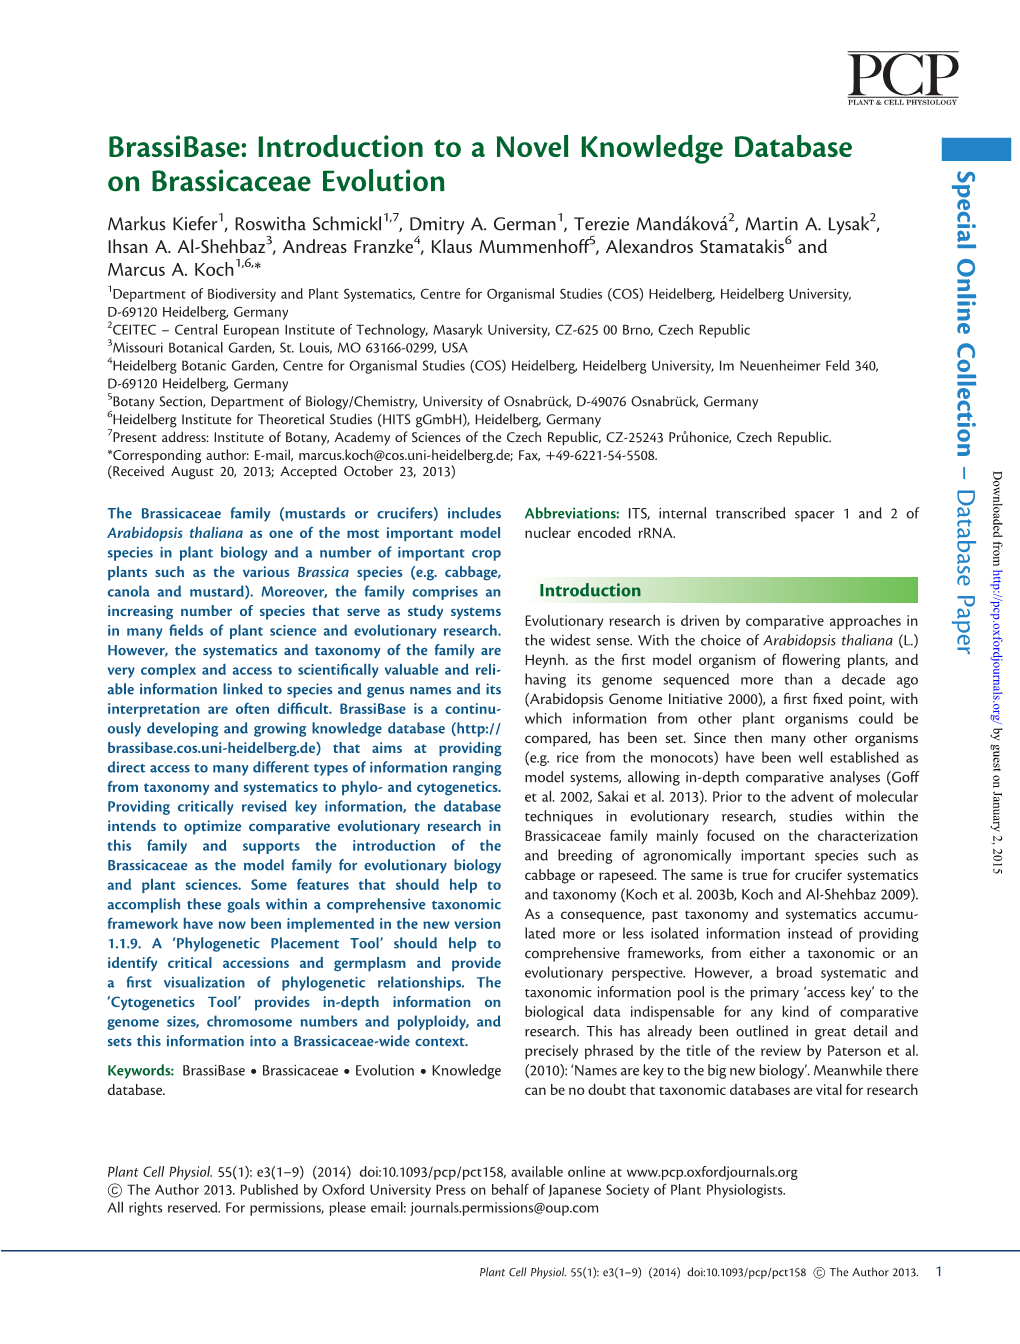 Introduction to a Novel Knowledge Database on Brassicaceae Evolution Collection Online Special Markus Kiefer1, Roswitha Schmickl1,7, Dmitry A